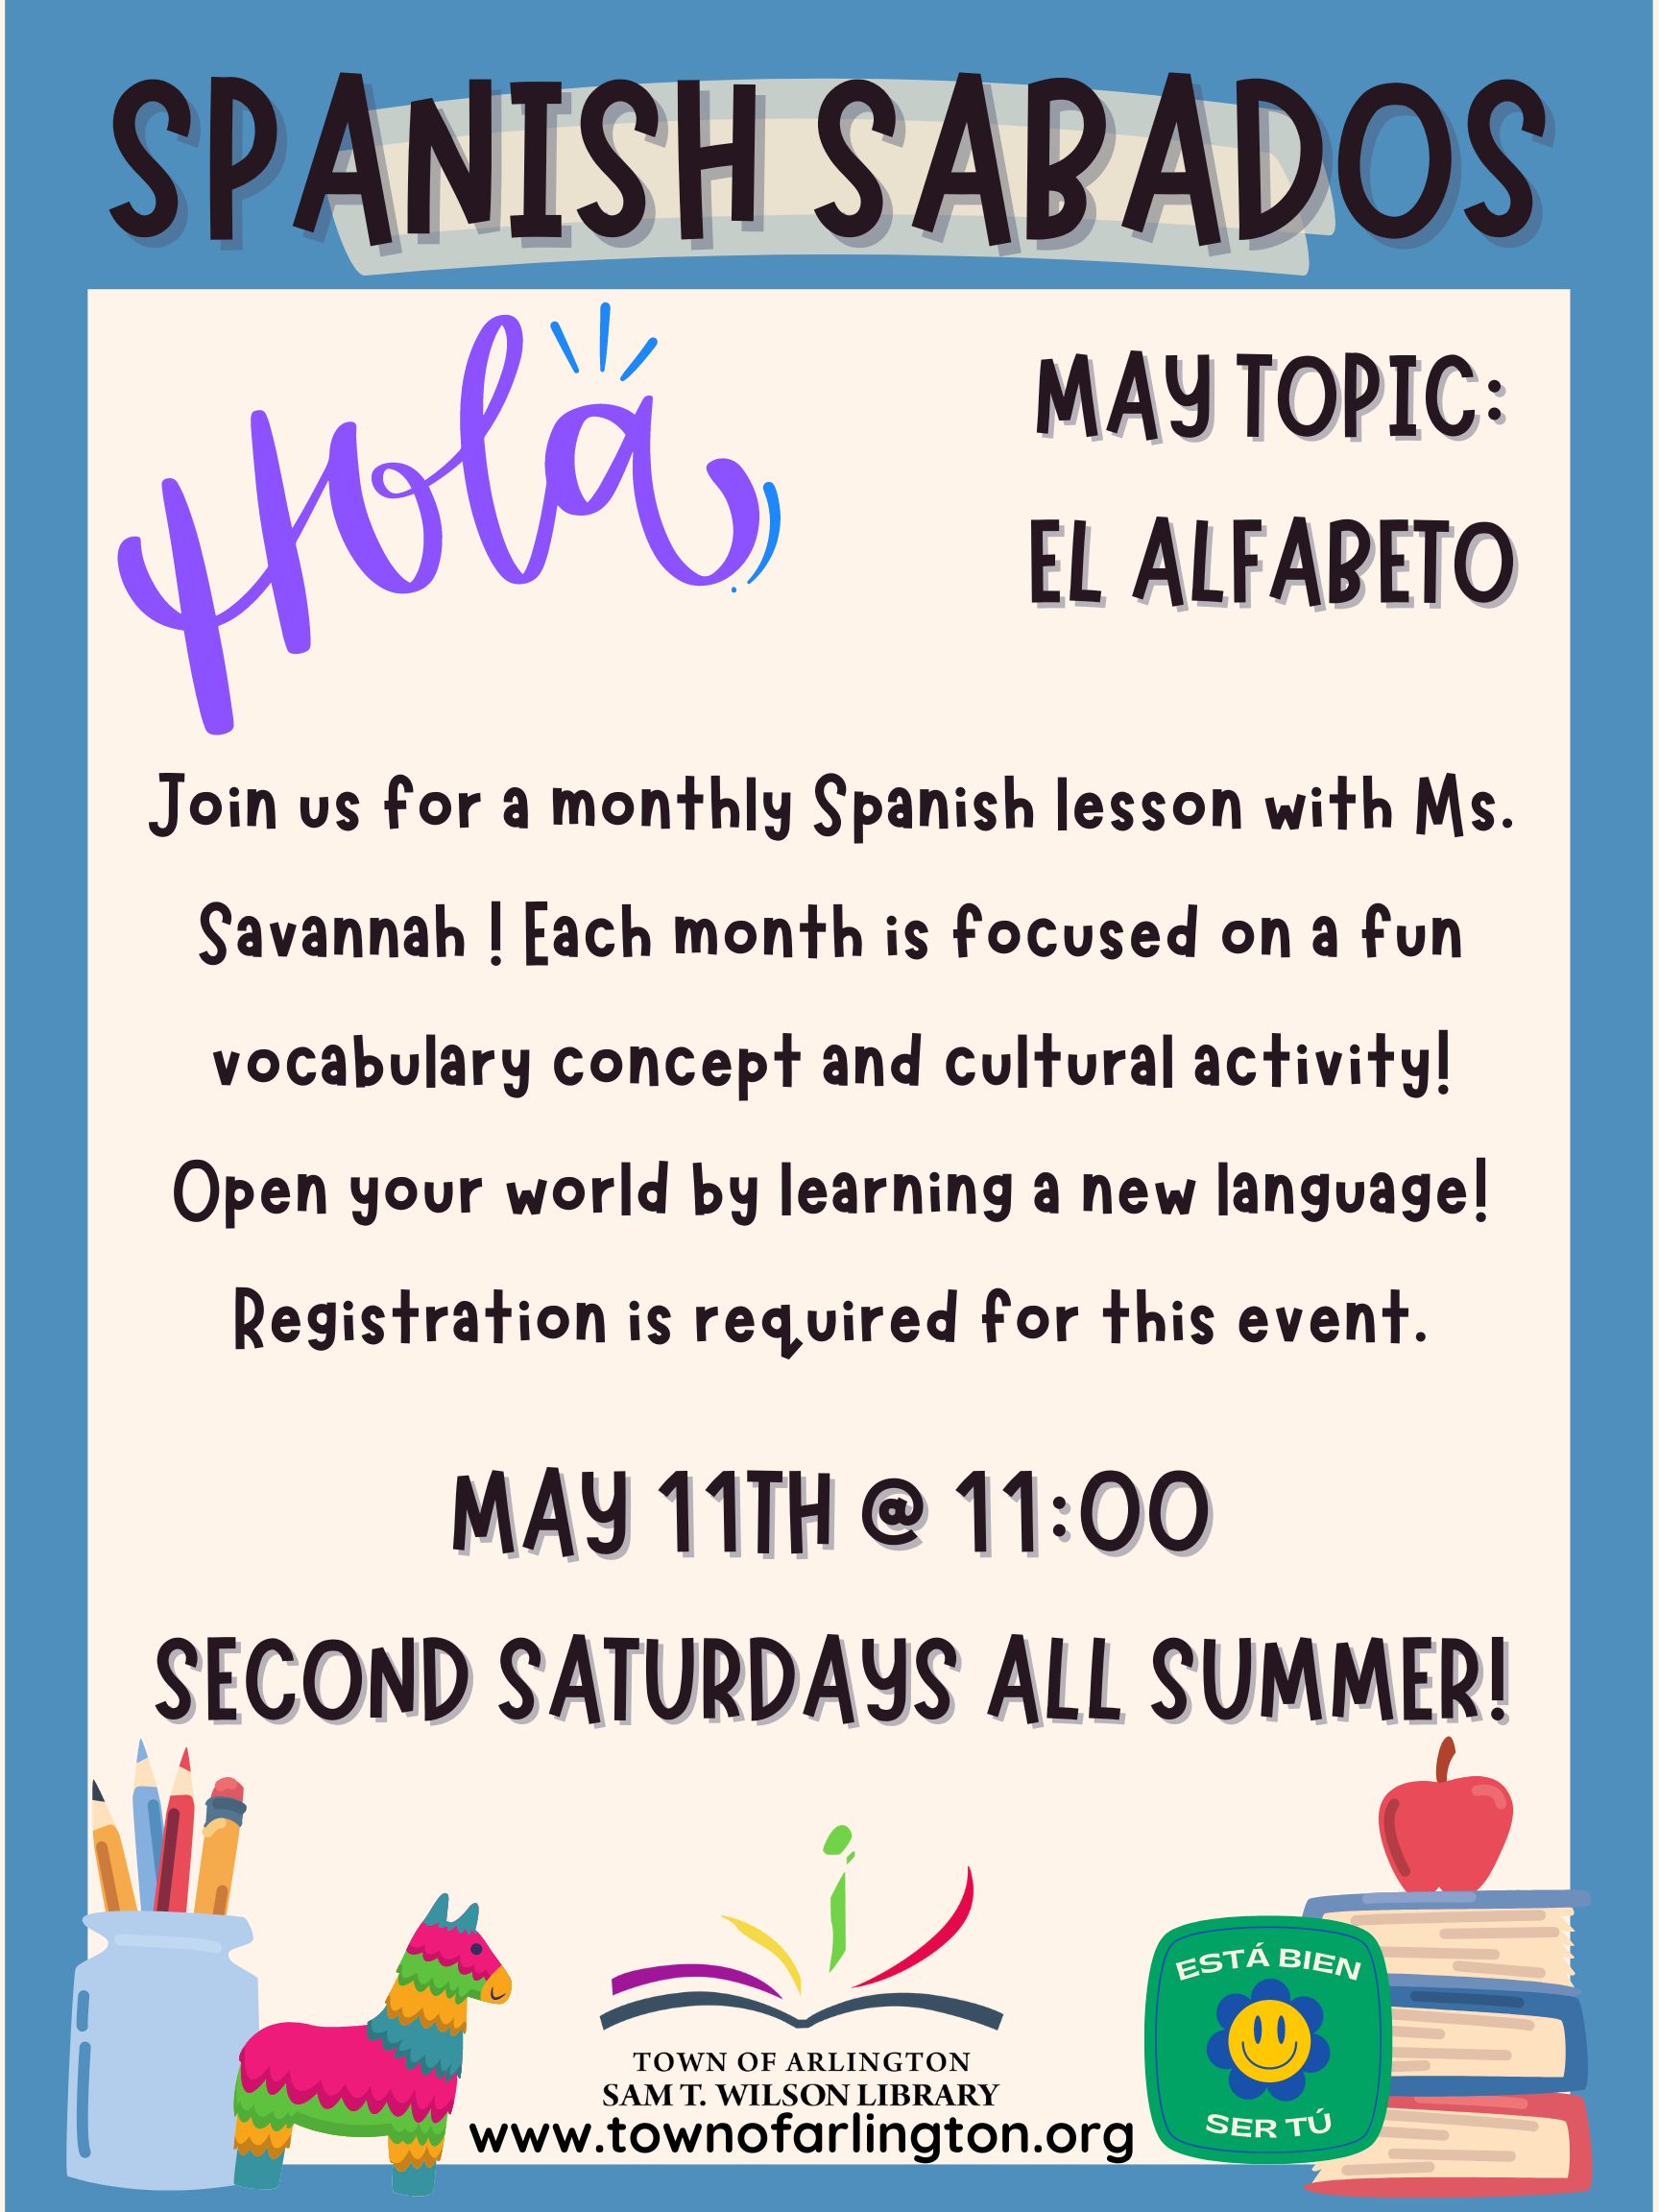 spanish sabados flyer for May 11th at 11am. course is the second saturday each summer month. may topic: el alfabeto